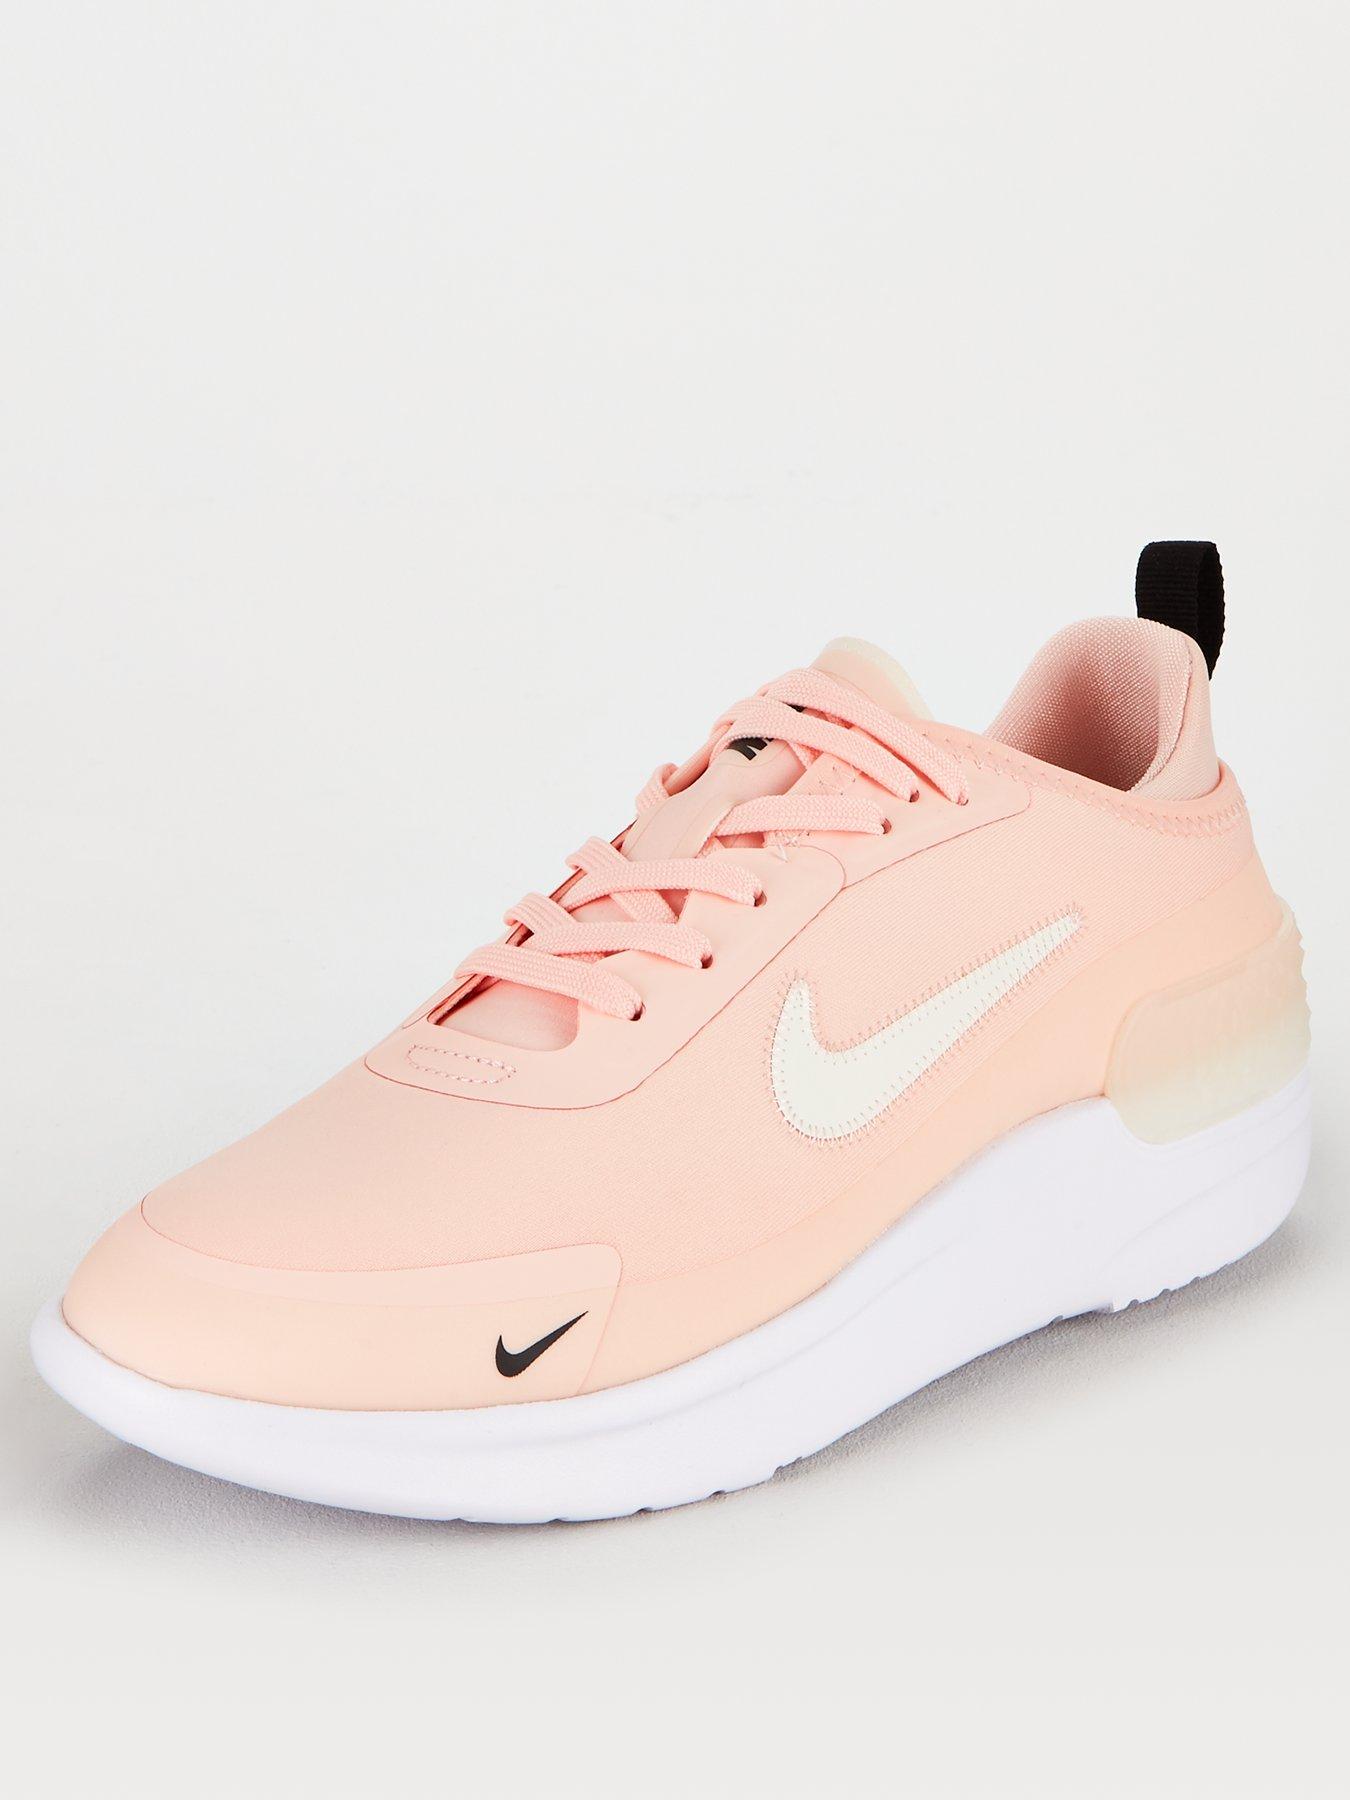 littlewoods womens nike trainers